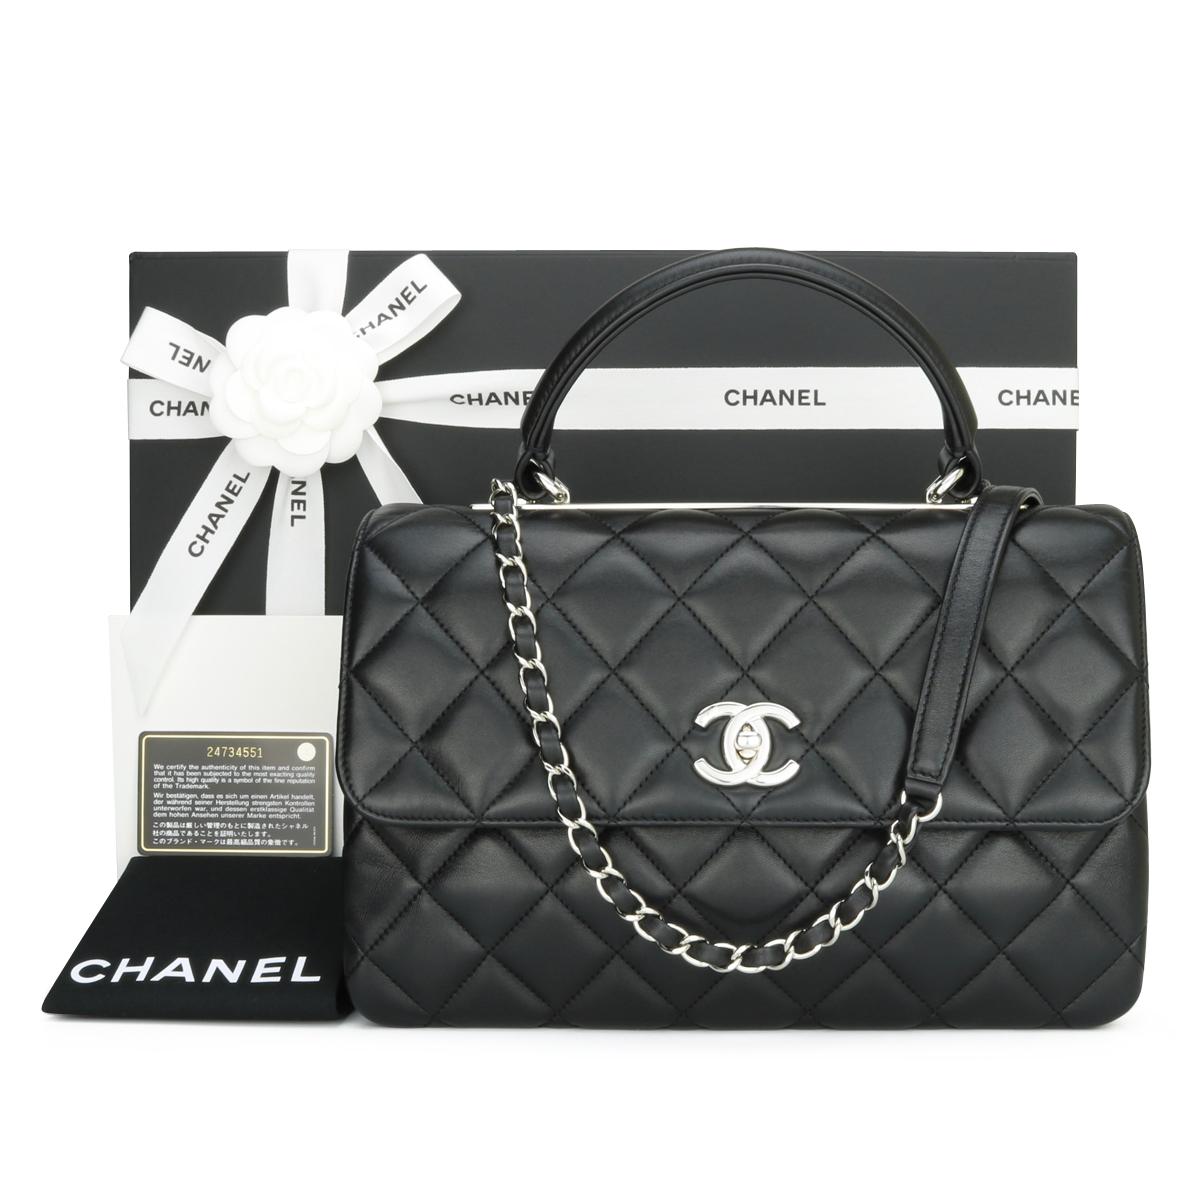 CHANEL Trendy CC Top Handle Bag Medium Black Lambskin with Silver Hardware 2017.

This stunning bag is in very good condition, the bag still holds its original shape, and the hardware is still very shiny.

This top handle bag is simply gorgeous in